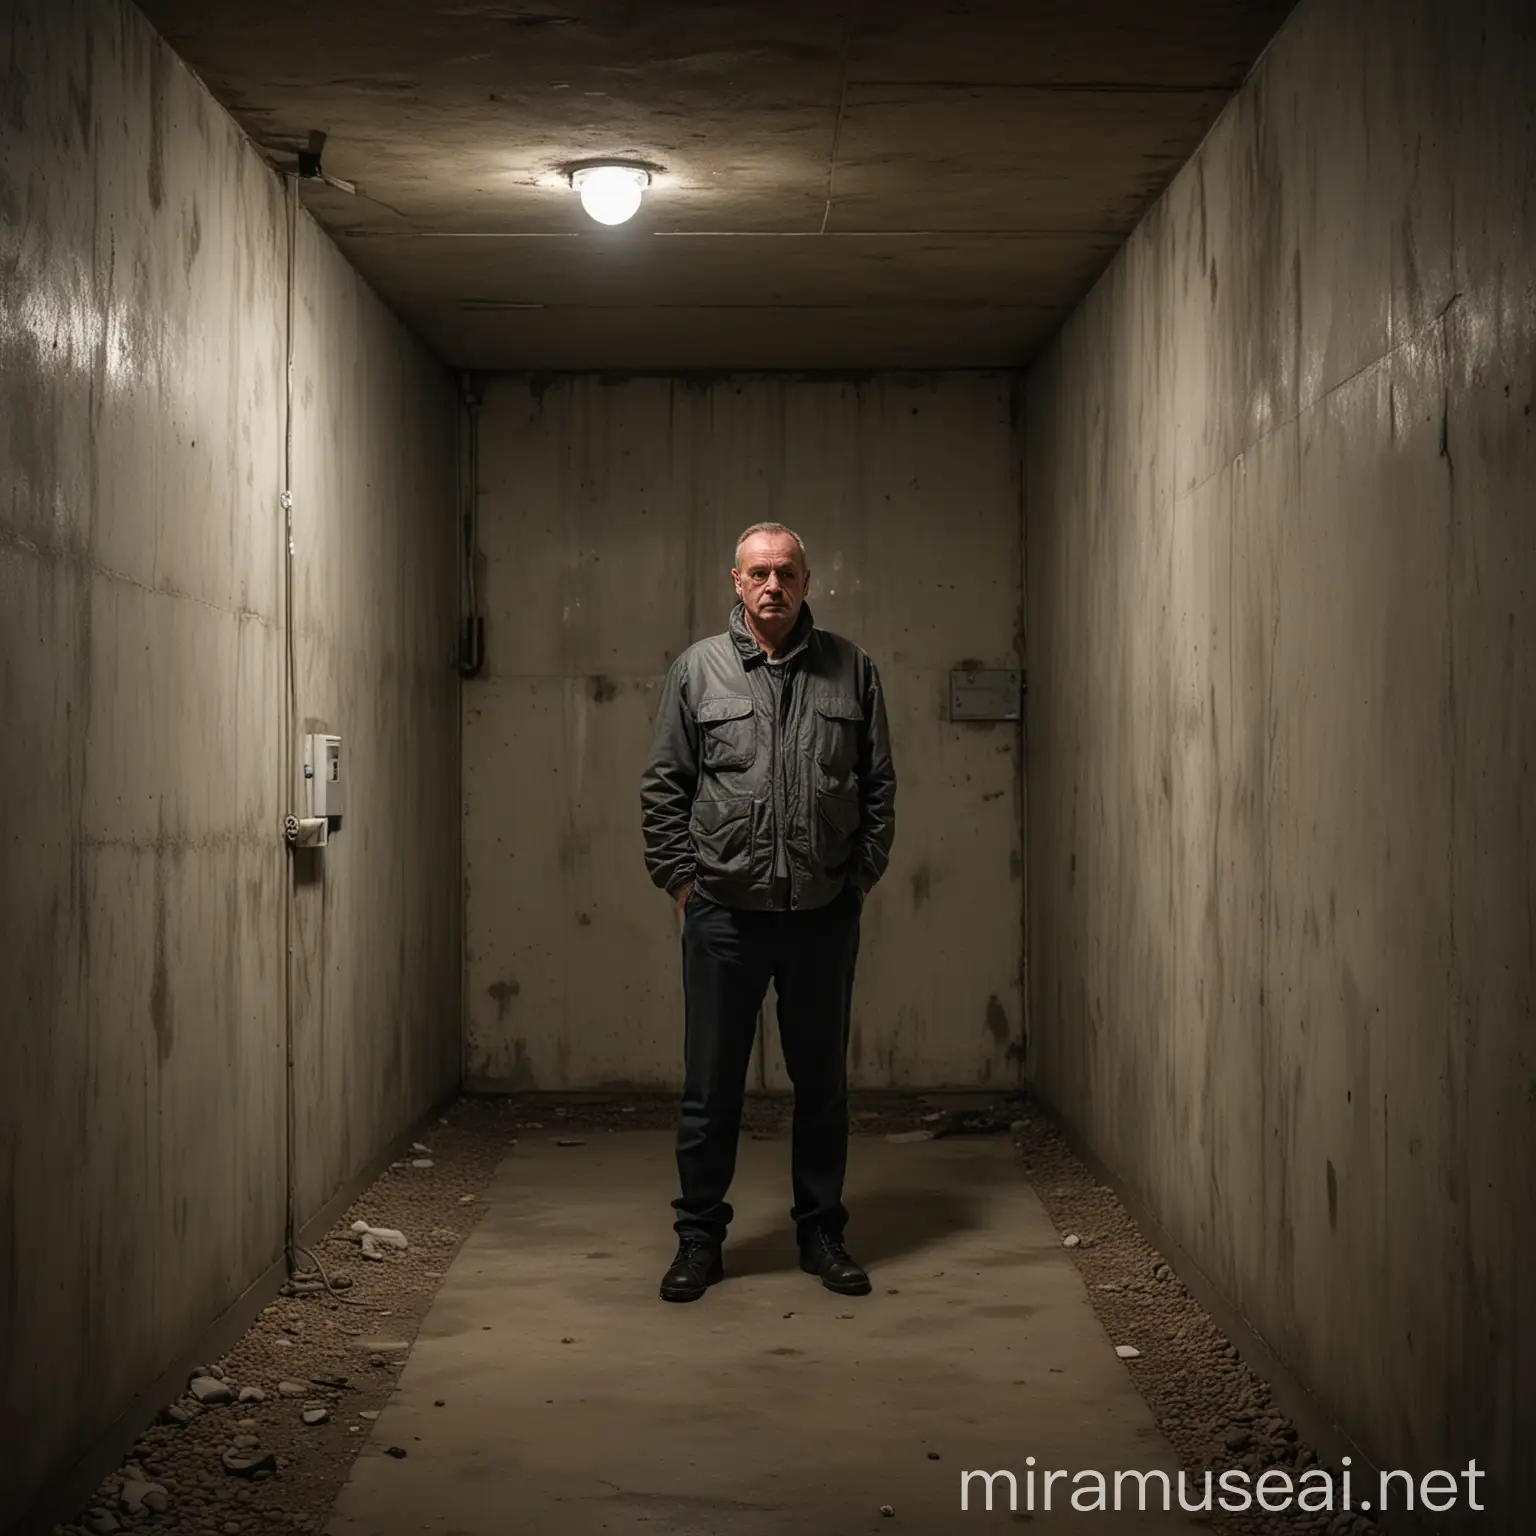 A medium shot of the infamous German serial killer Jürgen Bartsch, standing in a dimly lit, sterile basement room with concrete walls and sparse furniture, with a clearly visible unsettling and cold expression, his head straight and not tilted, under the harsh light of a single overhead bulb, during a quiet evening, shot with a Nikon Z7 II, 85mm f/1.2 lens, colorized with cold and desaturated tones